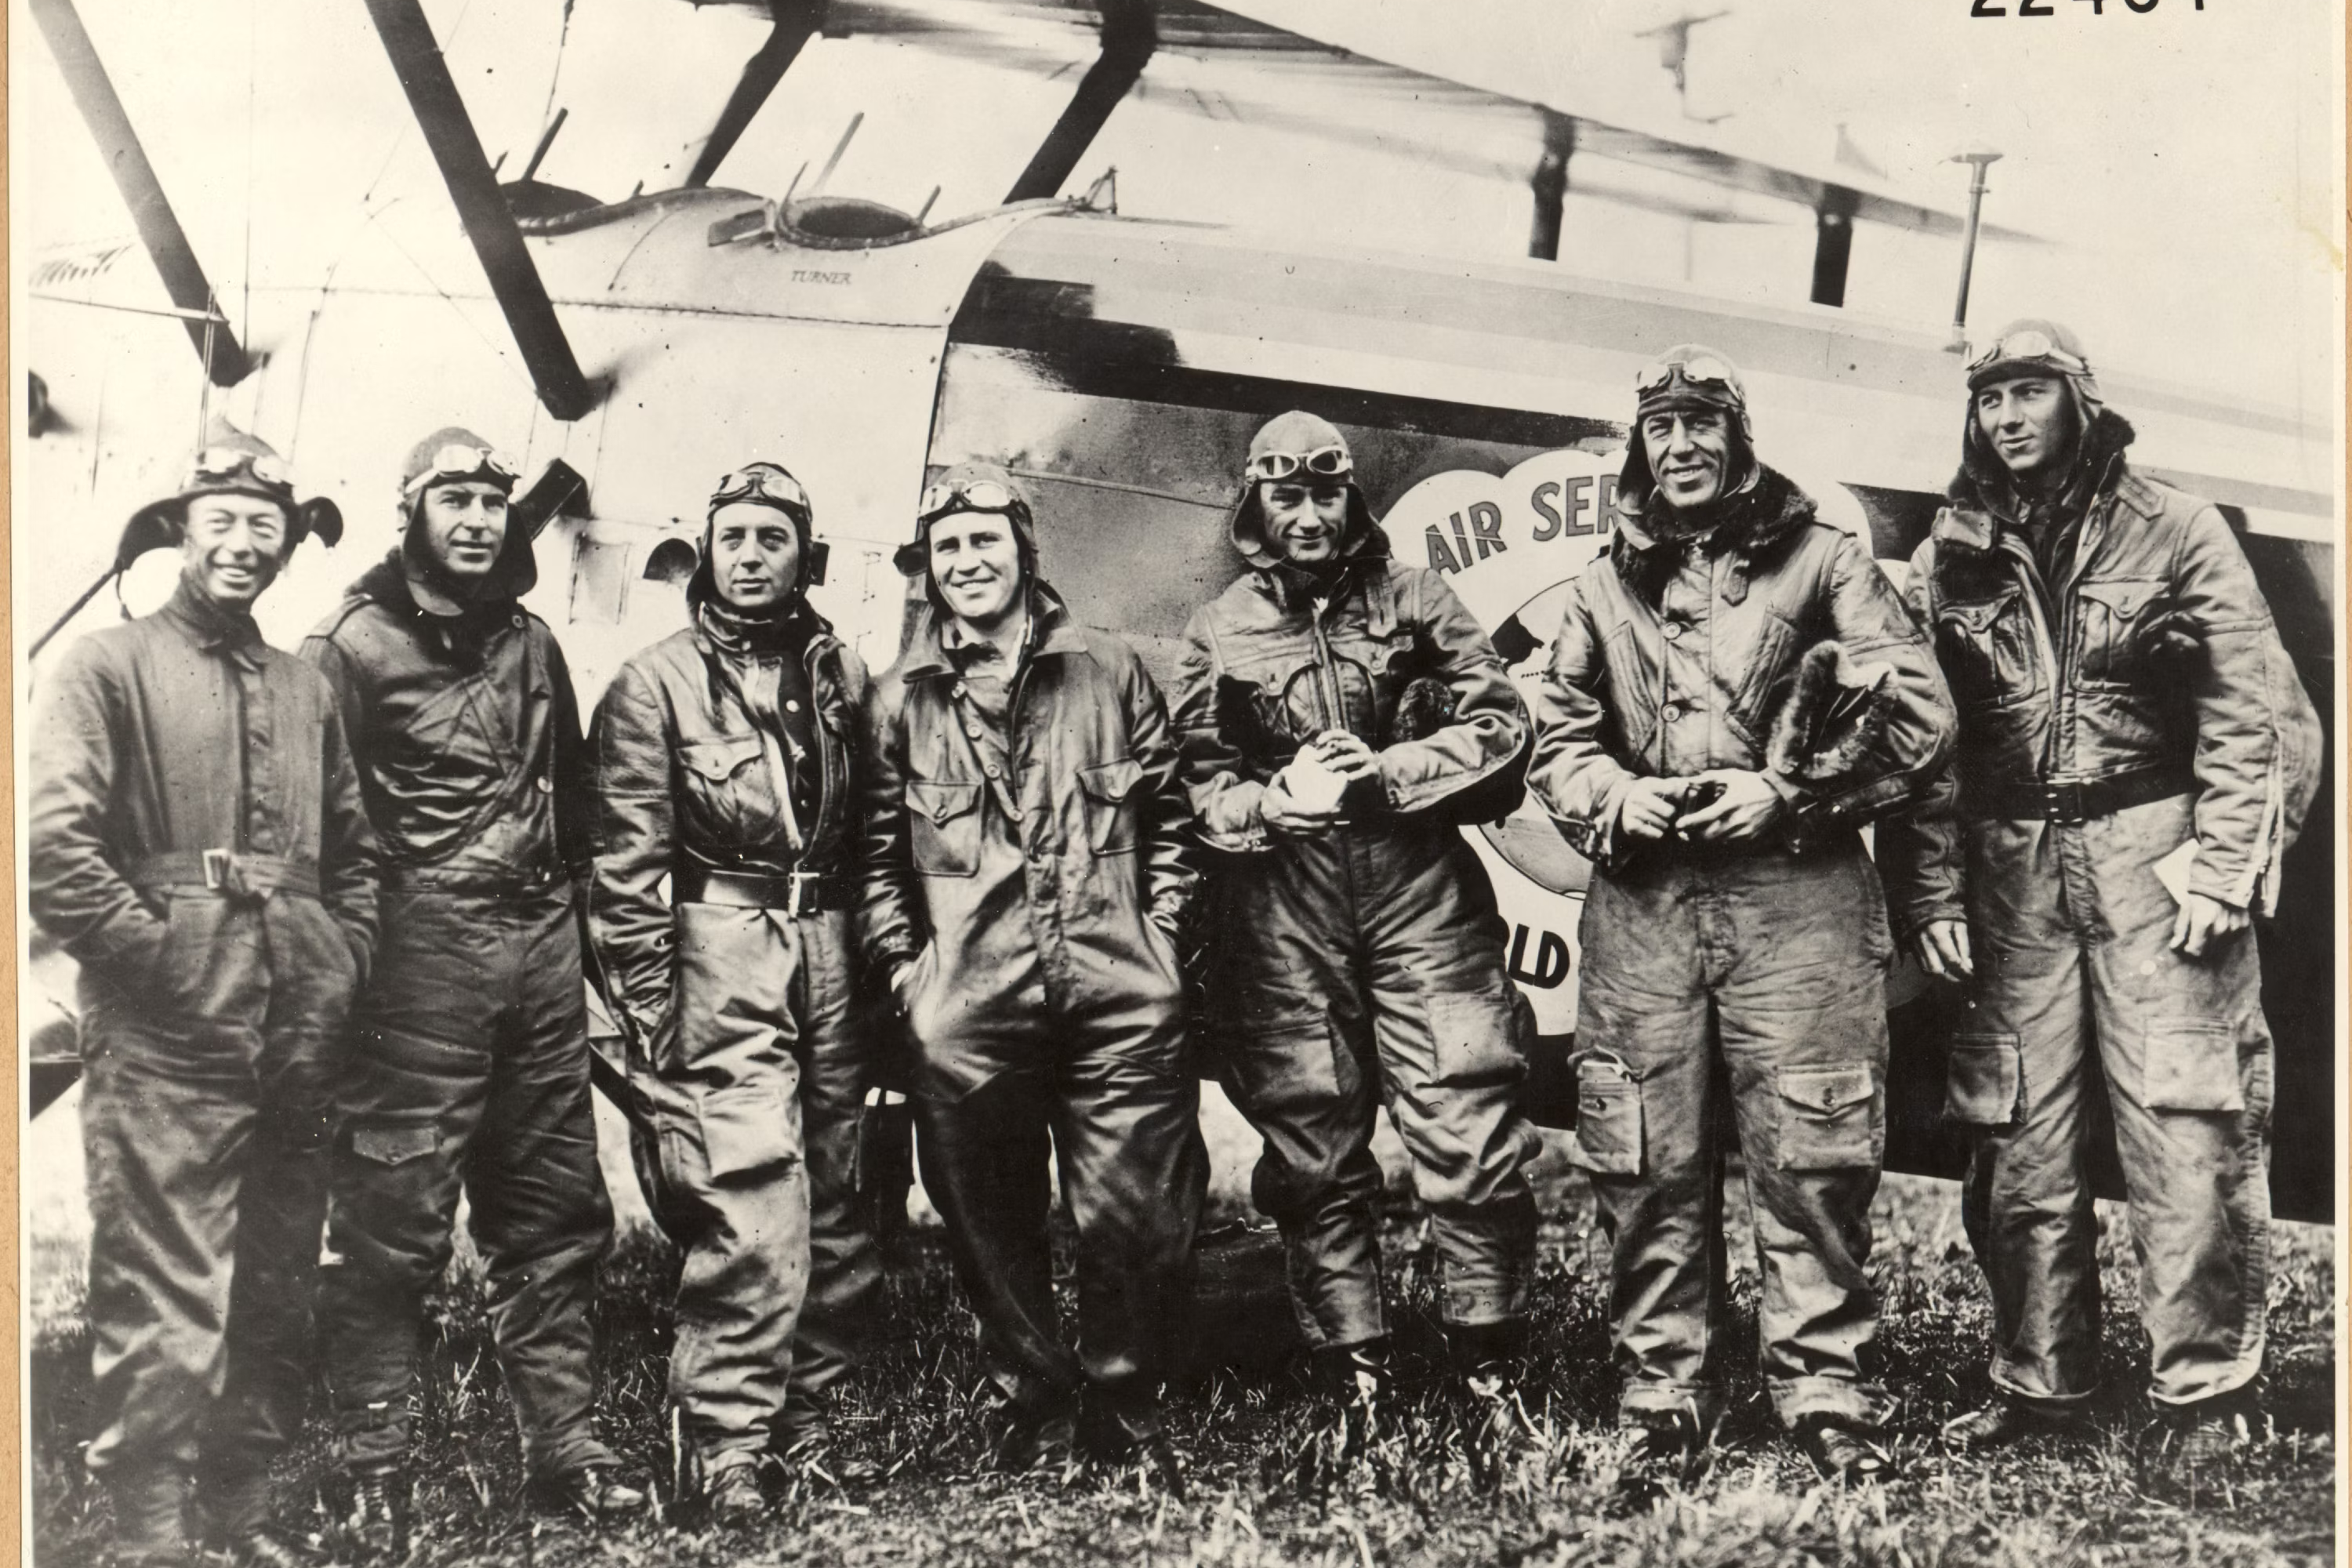 Several Air crew members from several nations standing near an aircraft.